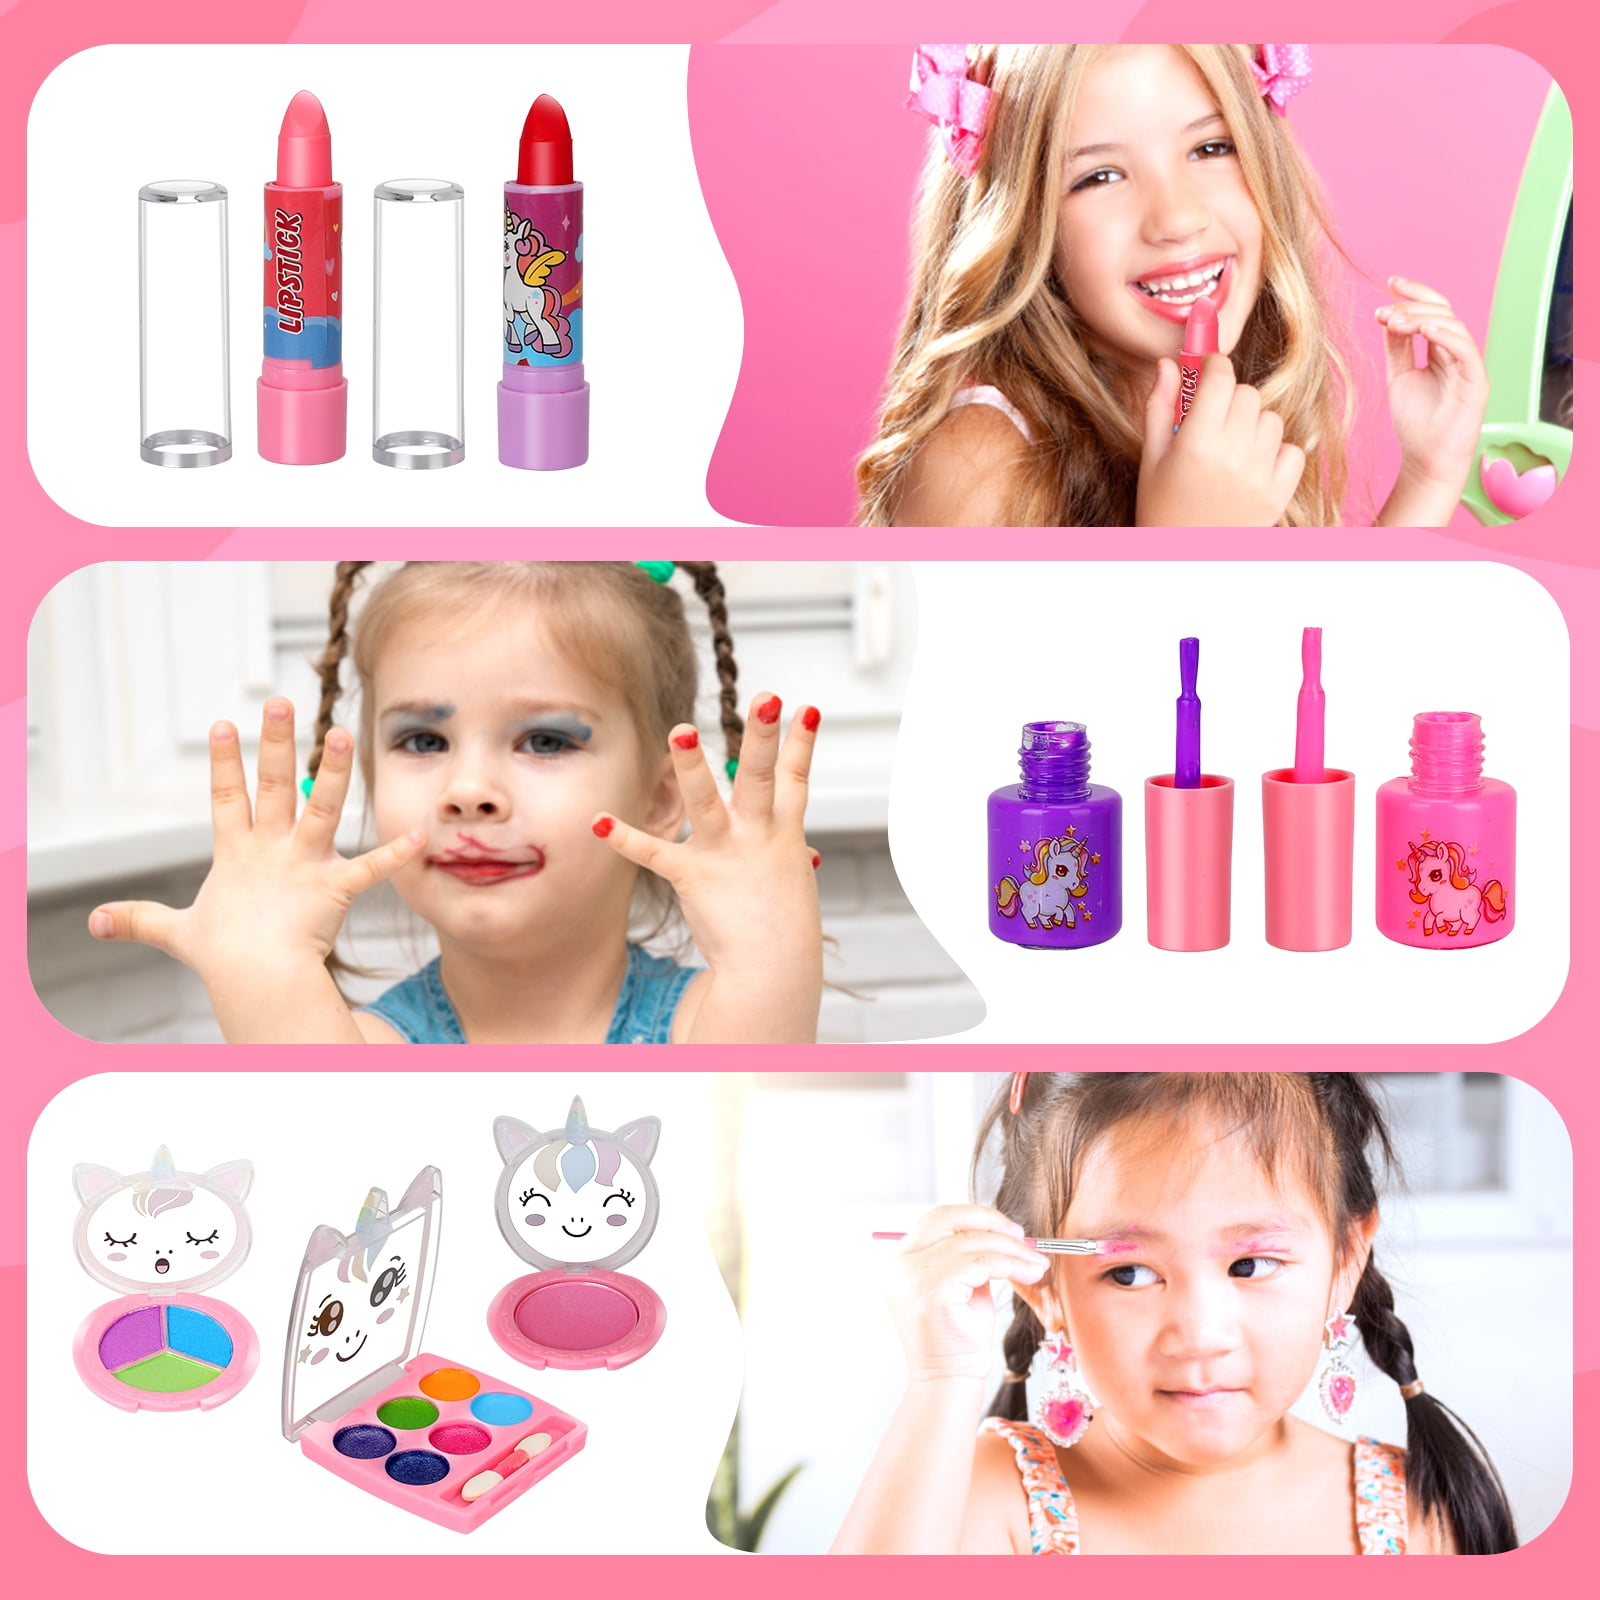 Kids Makeup Kit for Girls Camera styling, Real Washable Makeup Set for Kids  Girls,Birthday Gift Toy for Toddler Kid Girls Little Girl Princess Play  Make Up Gift for Girls Children Age 4